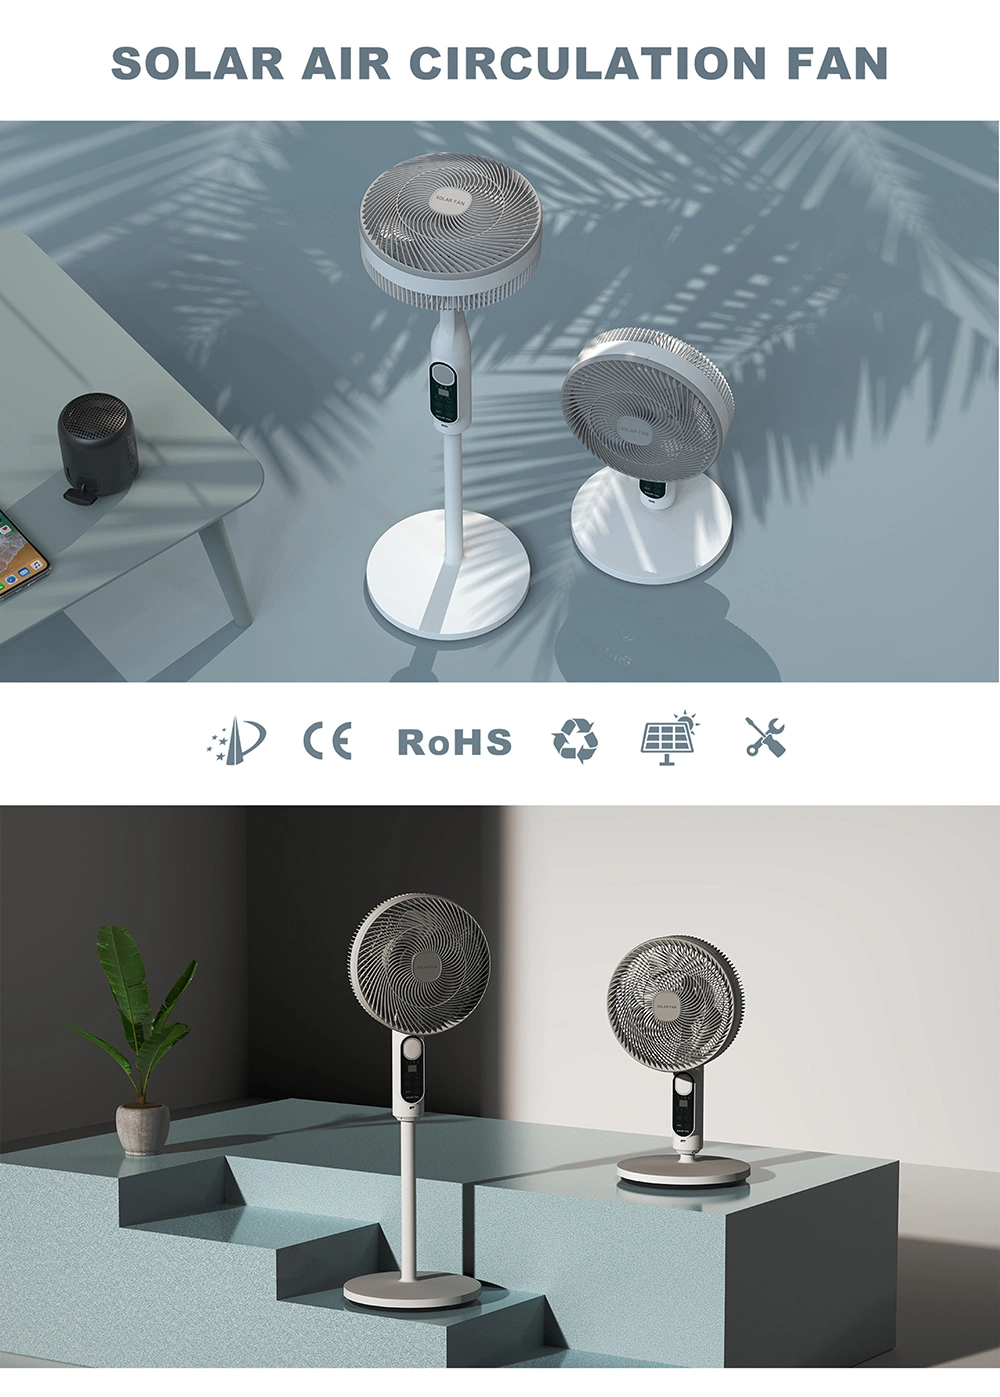 Sincerity Solar Air Circulation Fan 24h Timer Smart Remote Control for Home, Office, Indoor